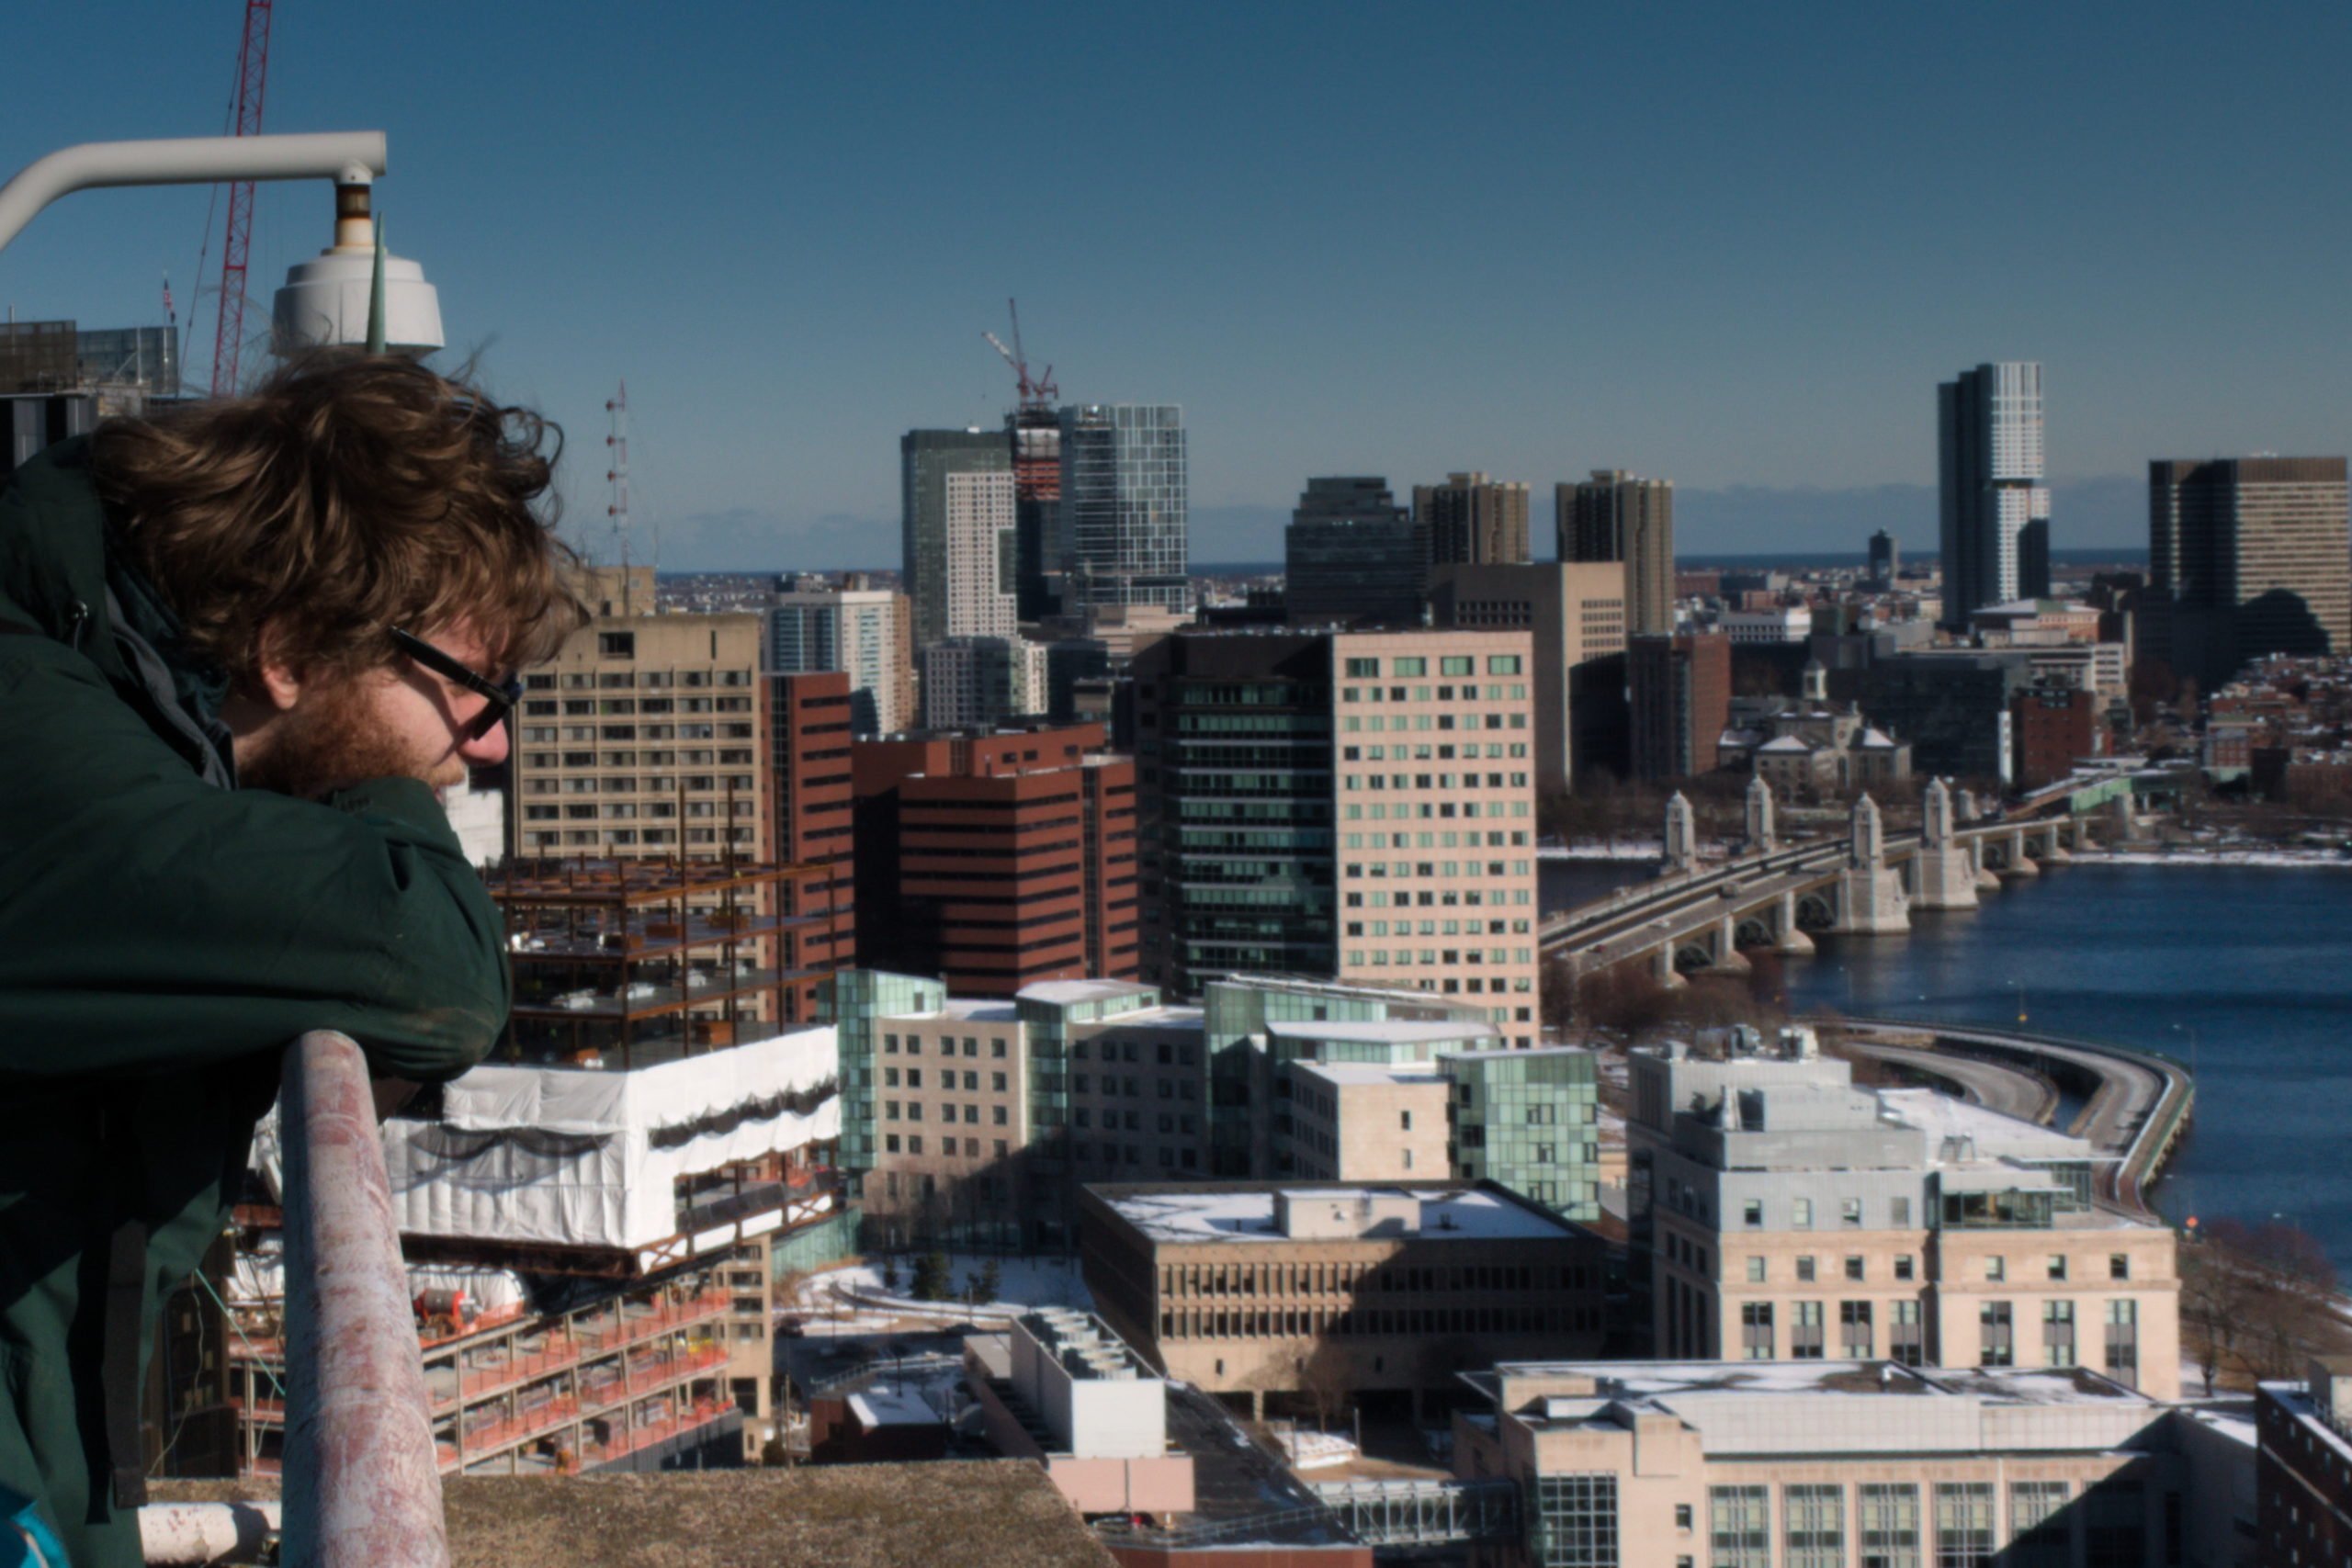 A member of the radio society looking out over the roof. Kendall Square and the eastern section of MIT are visible.